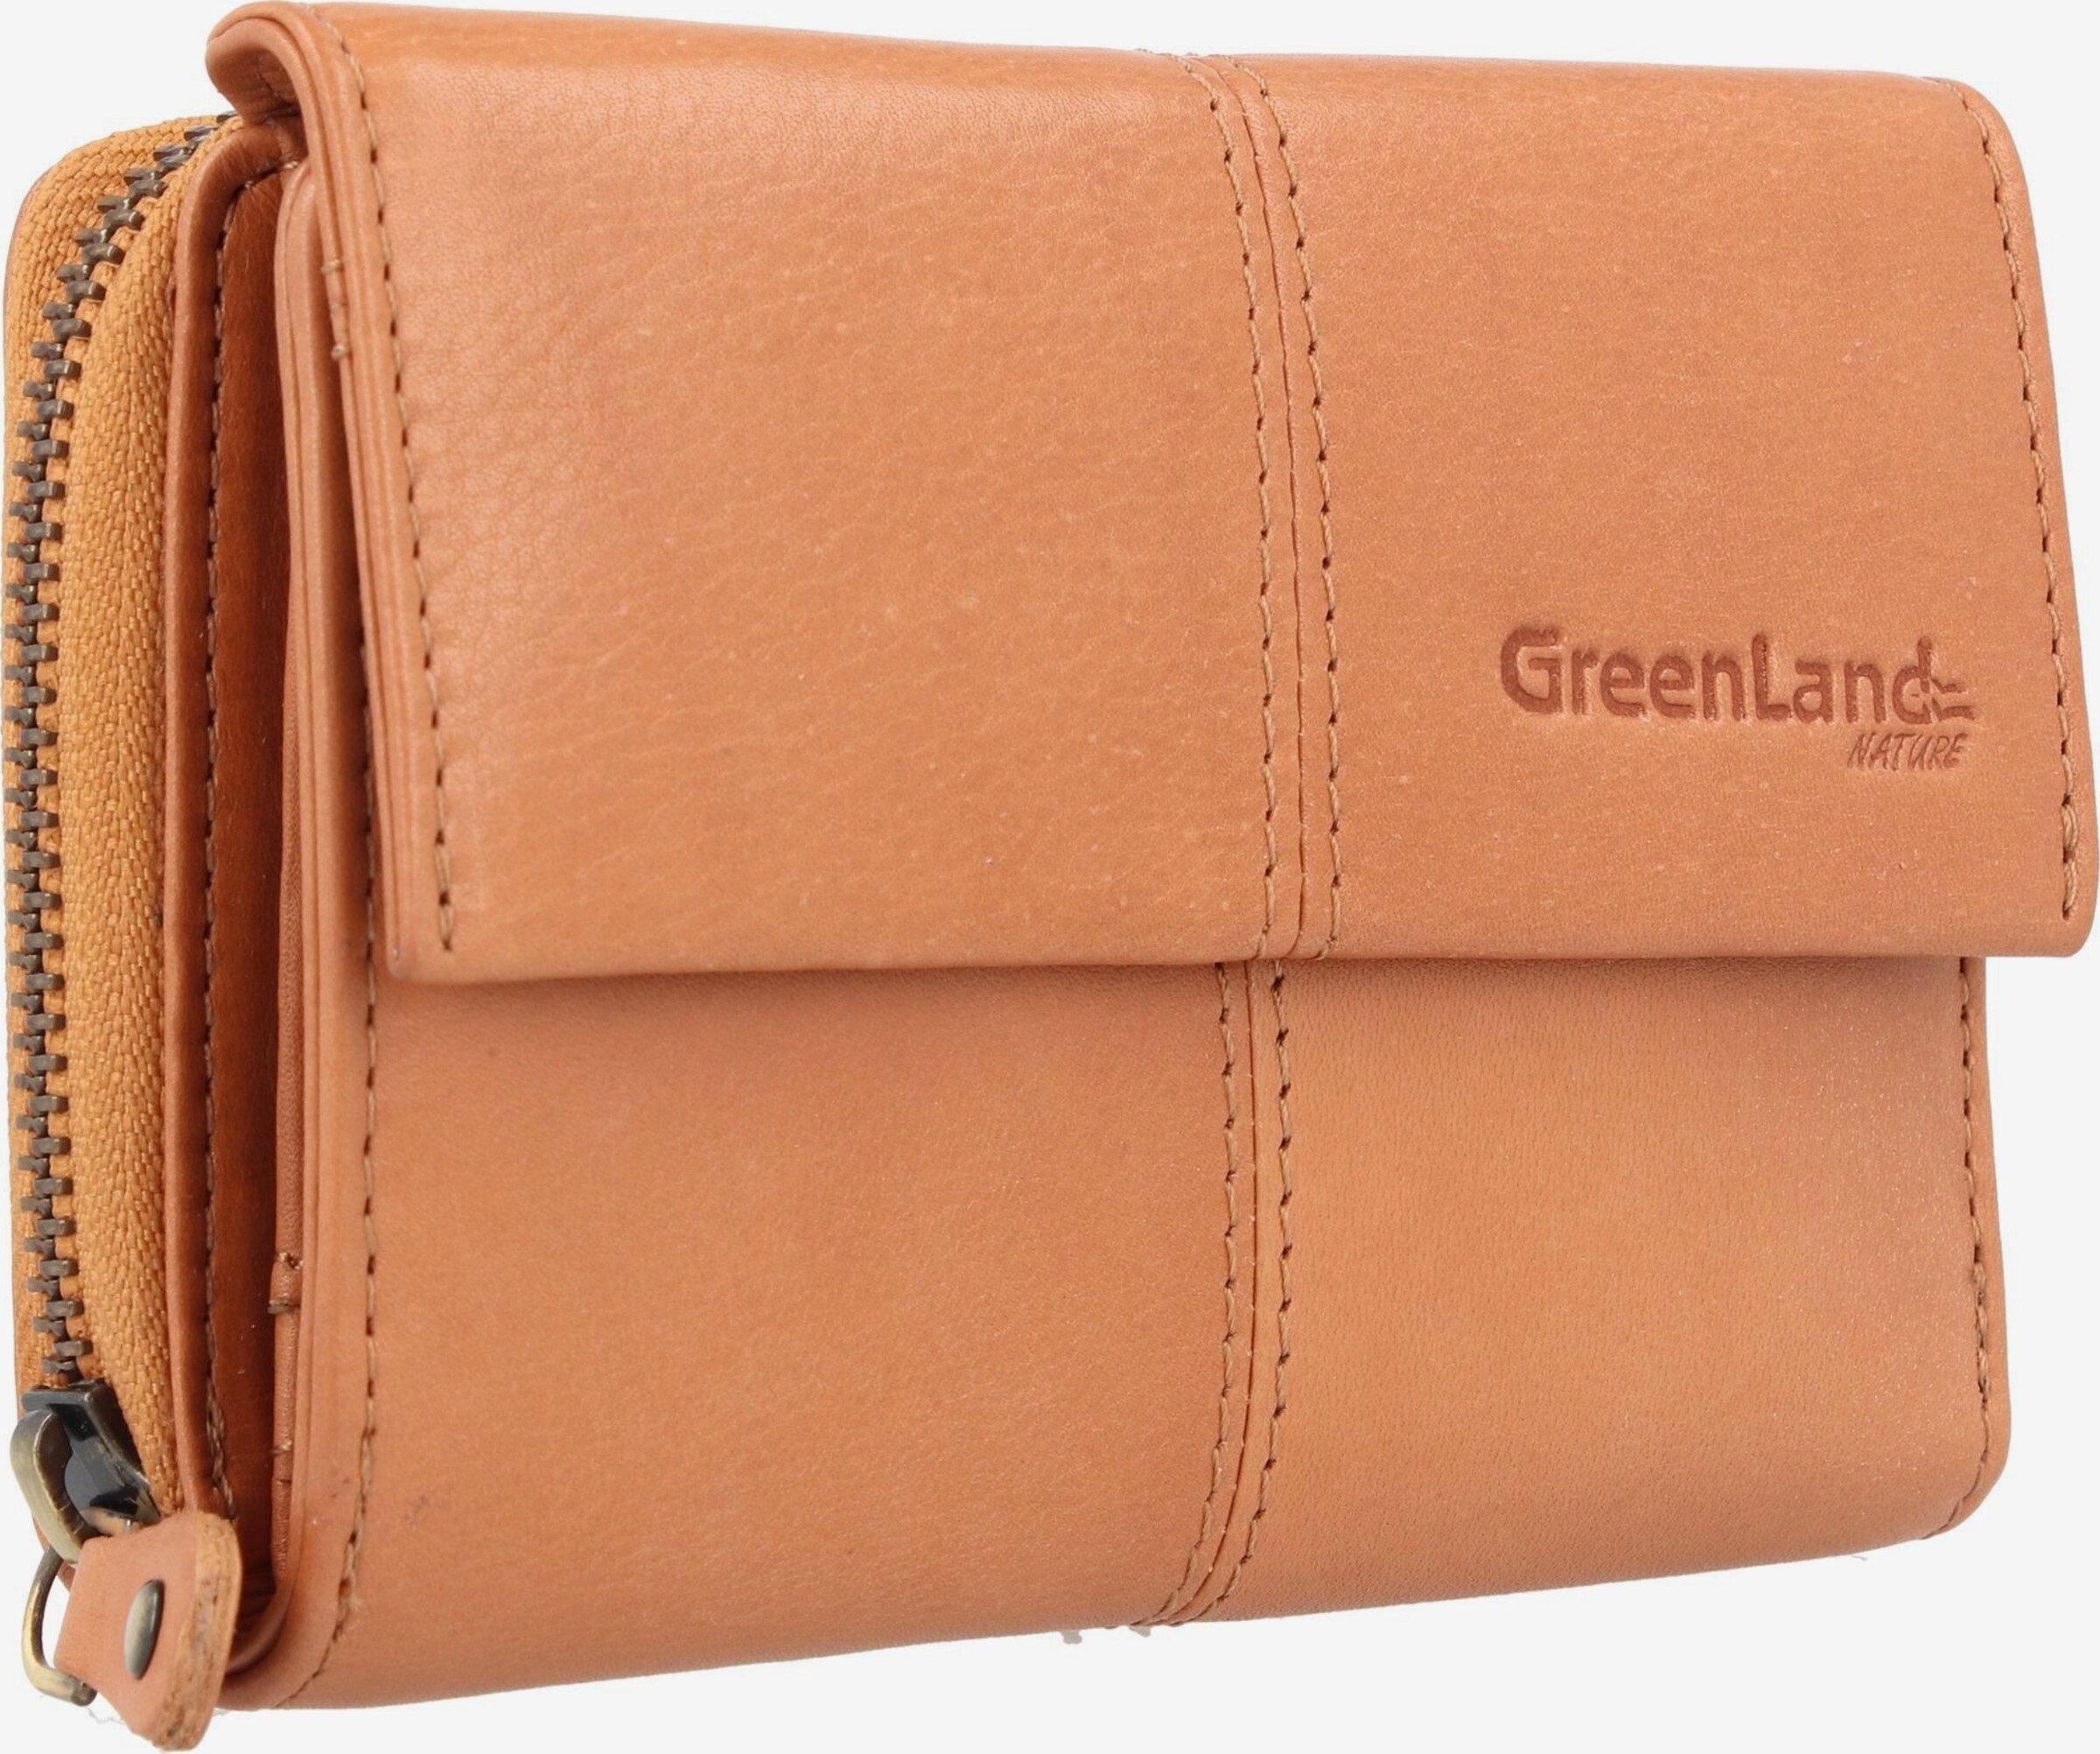 Greenland Nature Portemonnaie 'Nature Soft' in Orange | ABOUT YOU